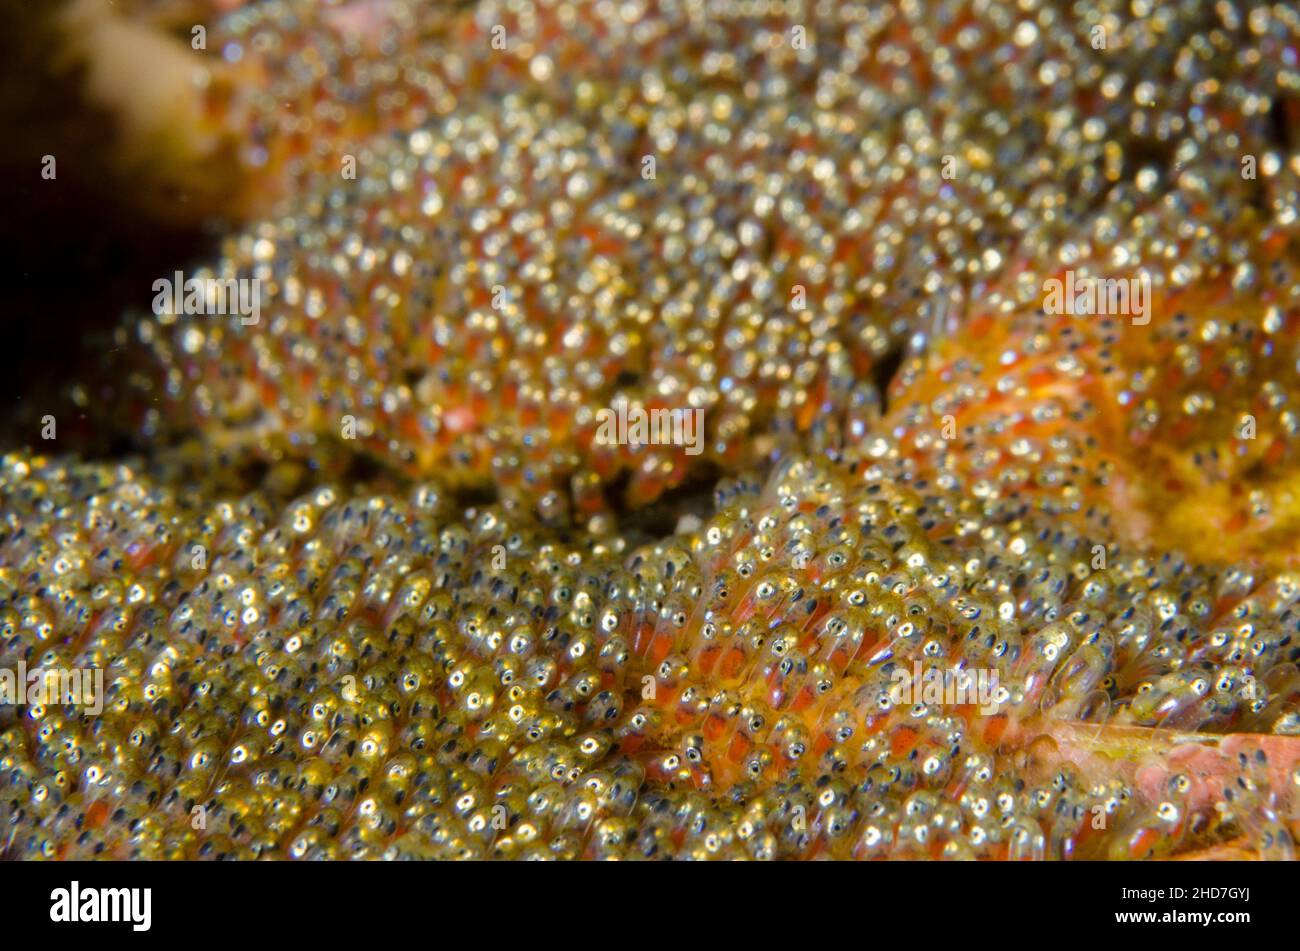 Eyes in eggs of Clark's Anemonefish (Amphiprion clarkii)), Gili Tepekong dive site, Candidasa, Bali, Indonesia. Stock Photo